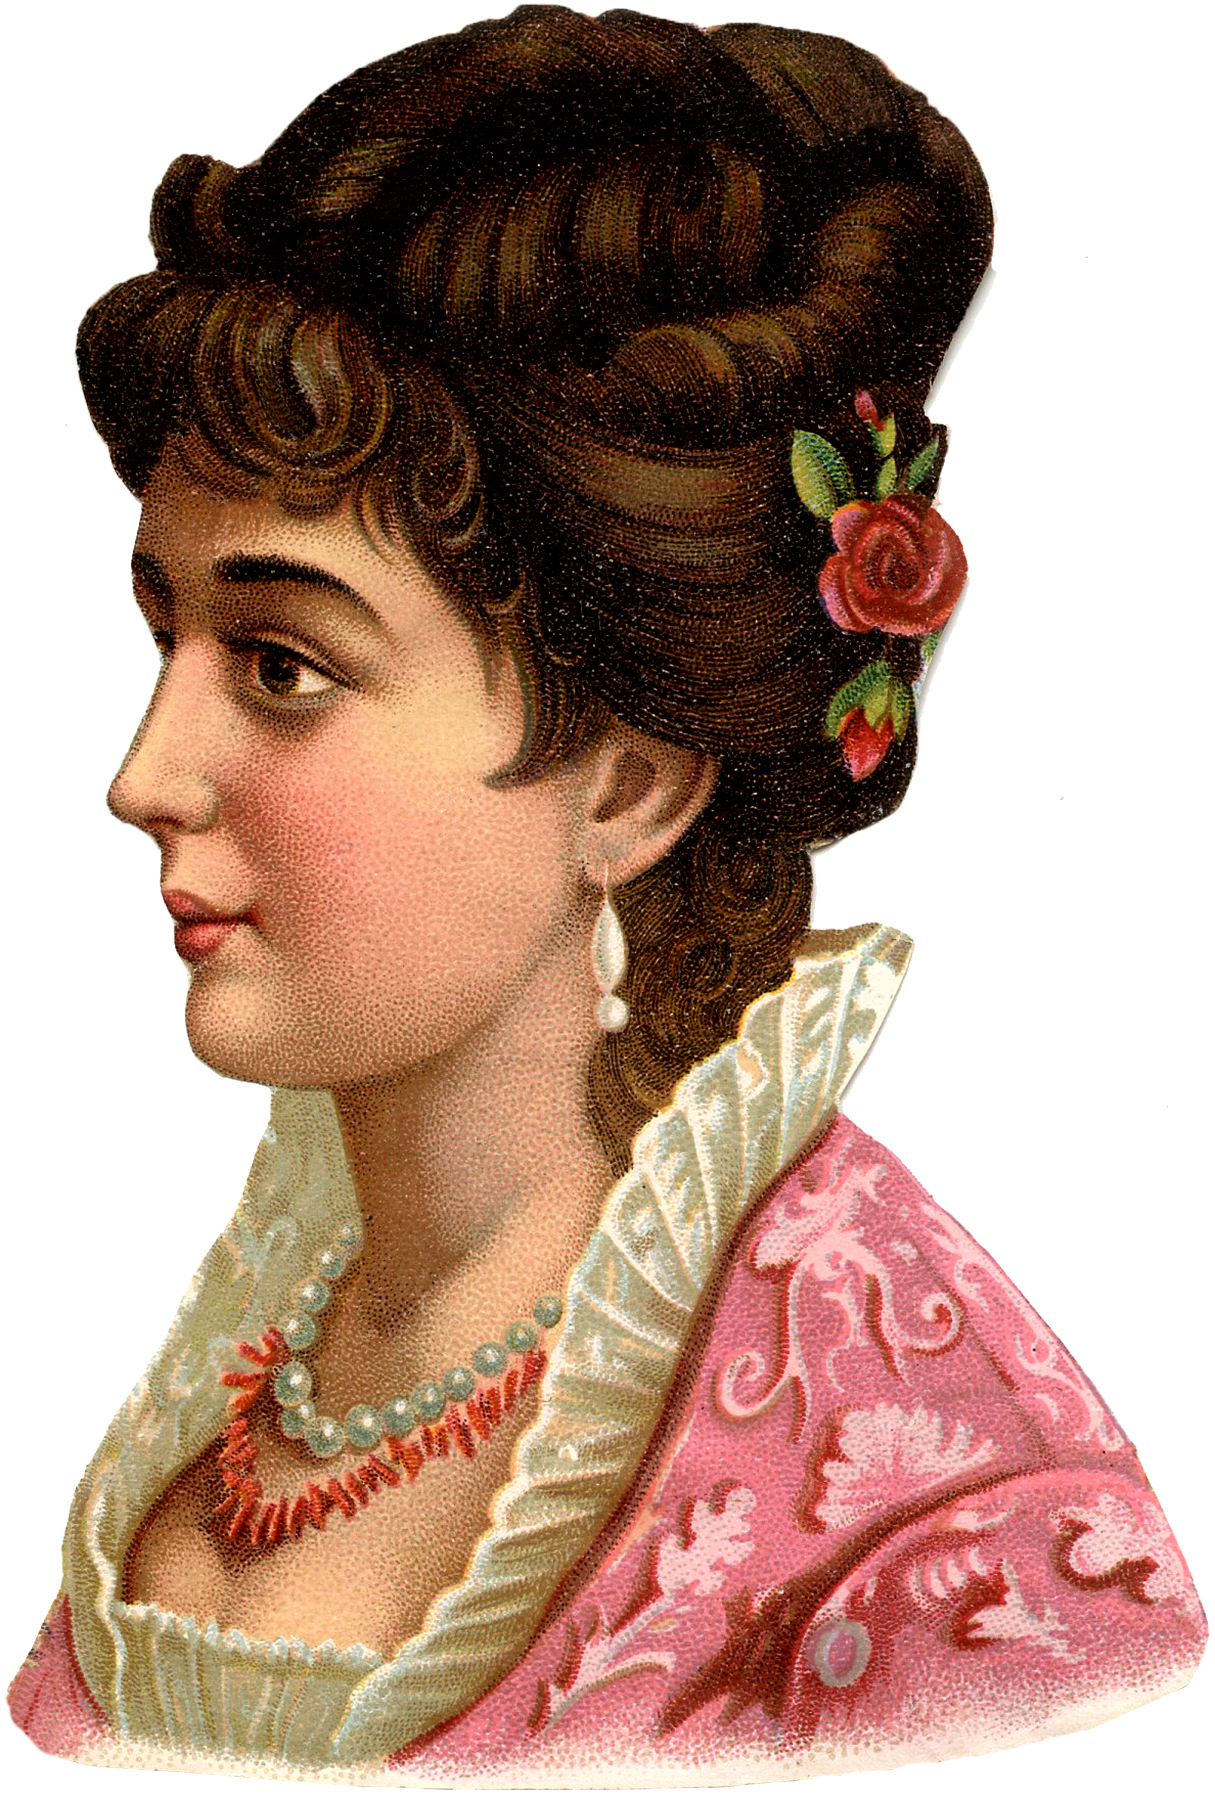 http://thegraphicsfairy.com/wp-content/uploads/2015/06/Vintage-Lady-in-Pink-GraphicsFairy.jpg